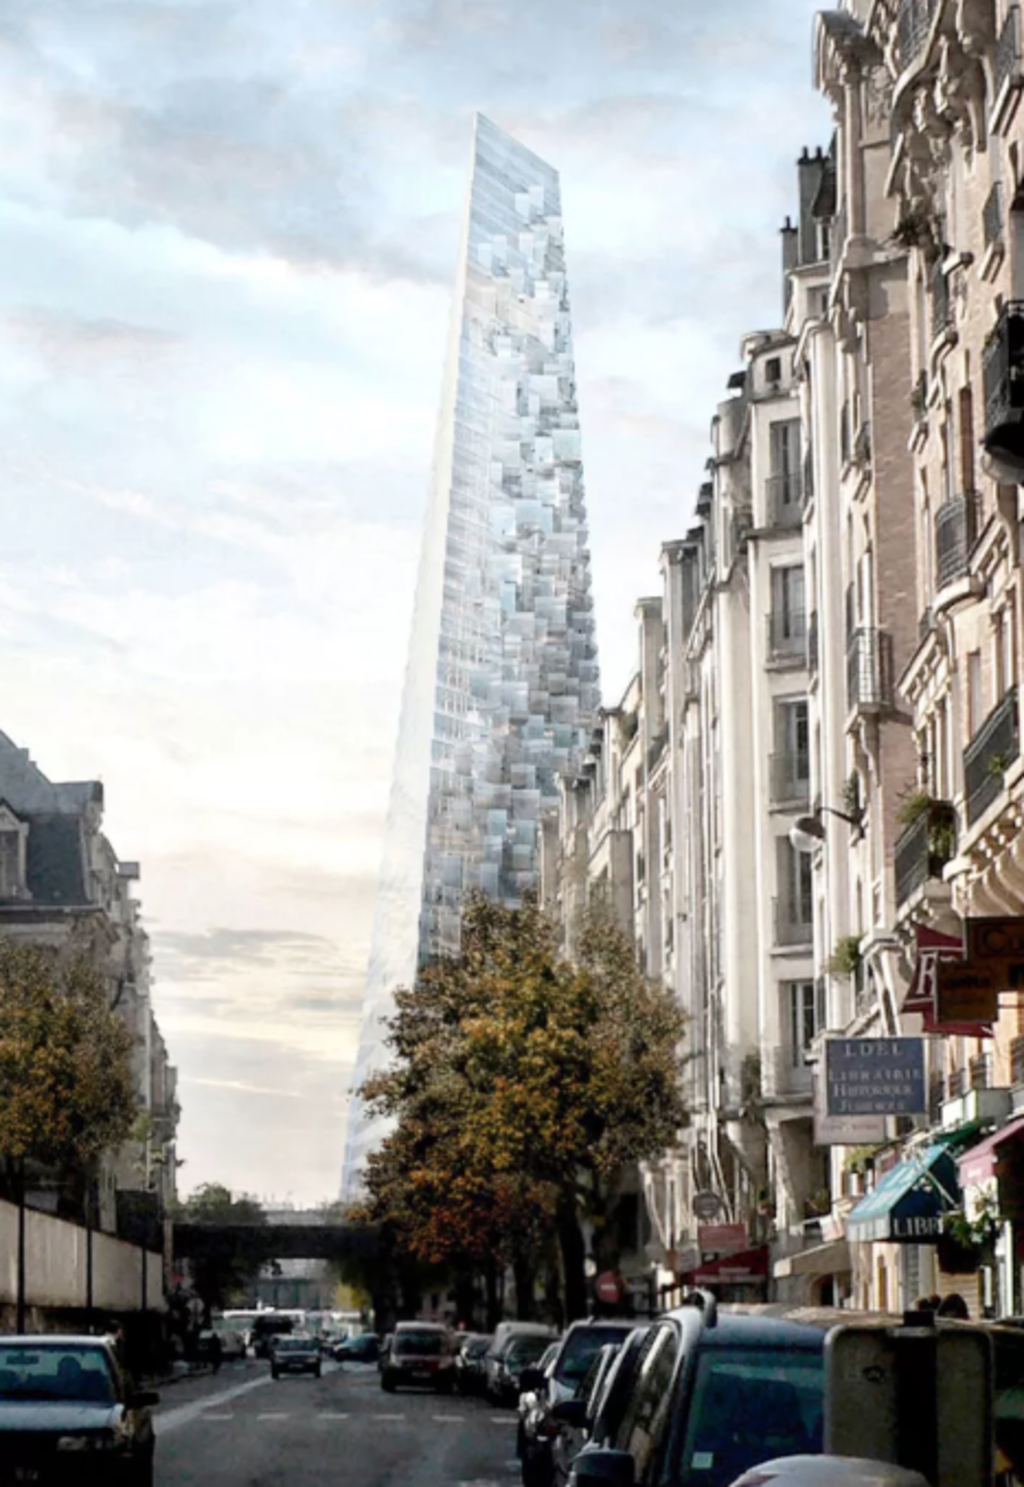 The Tour Triangle will become the city's third tallest building after the Eiffel Tower and the Montparnasse Tower. Photo: Herzog & de Meuron